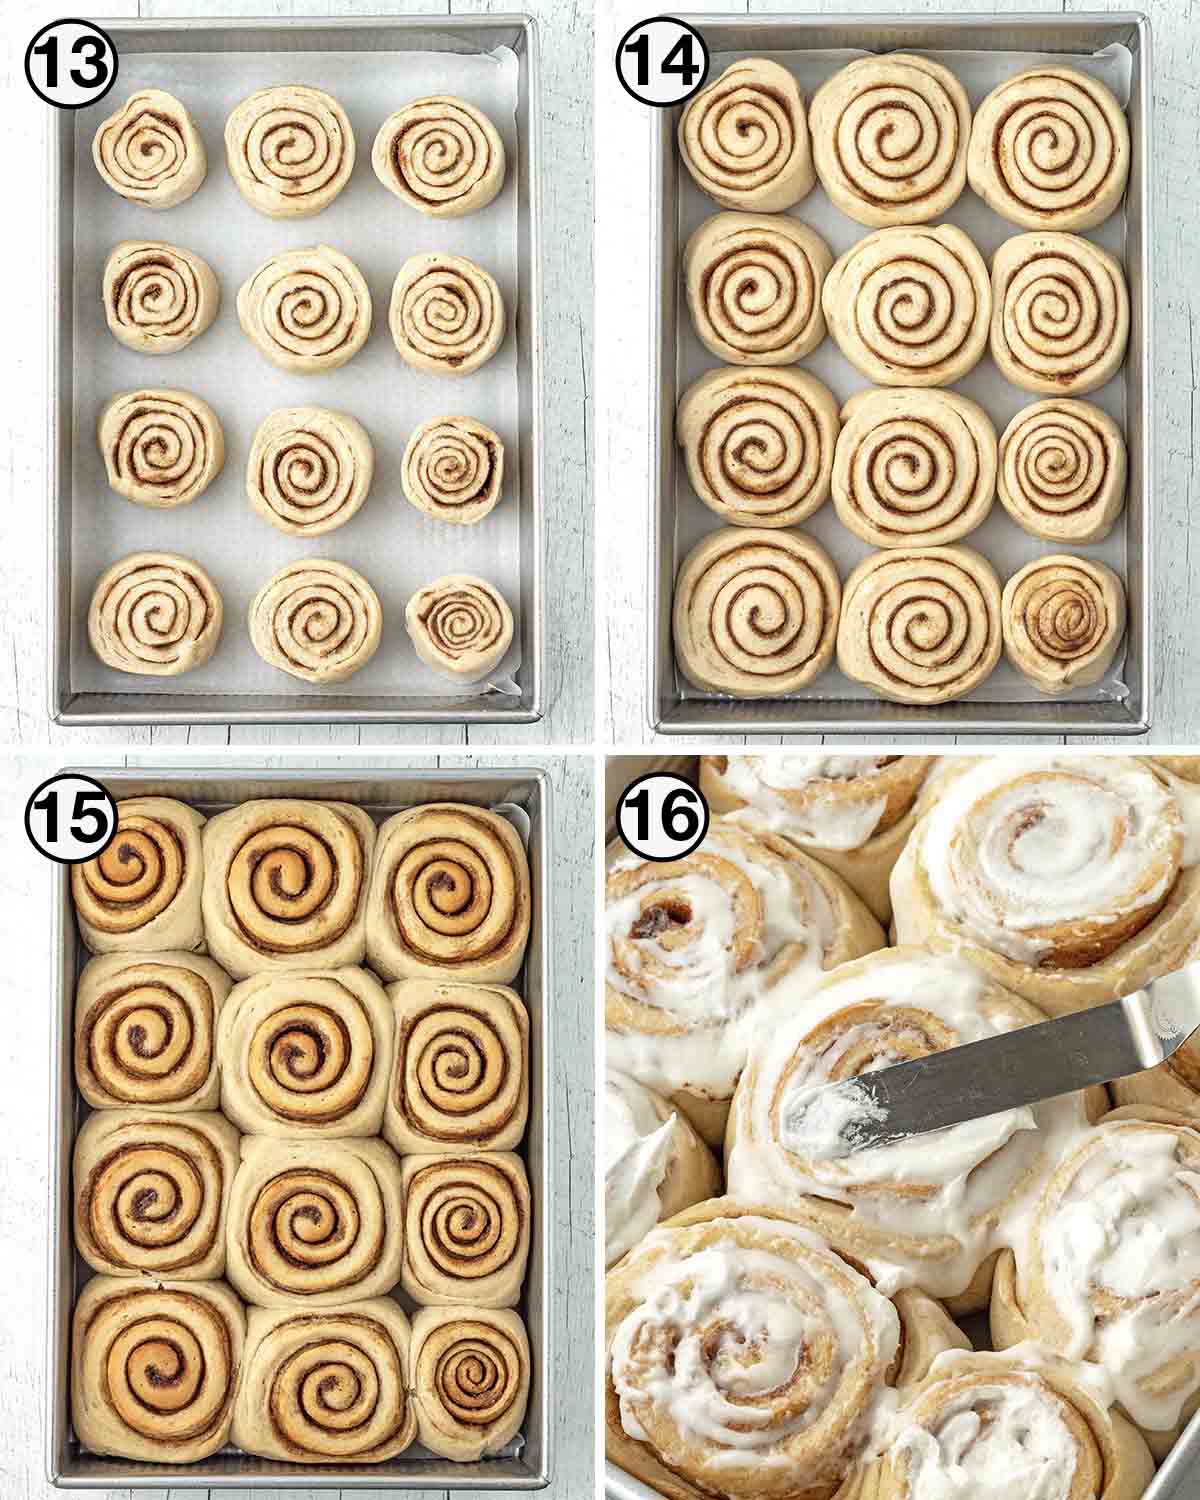 A collage of four images showing the final sequence of steps needed to make vegan cinnamon rolls.